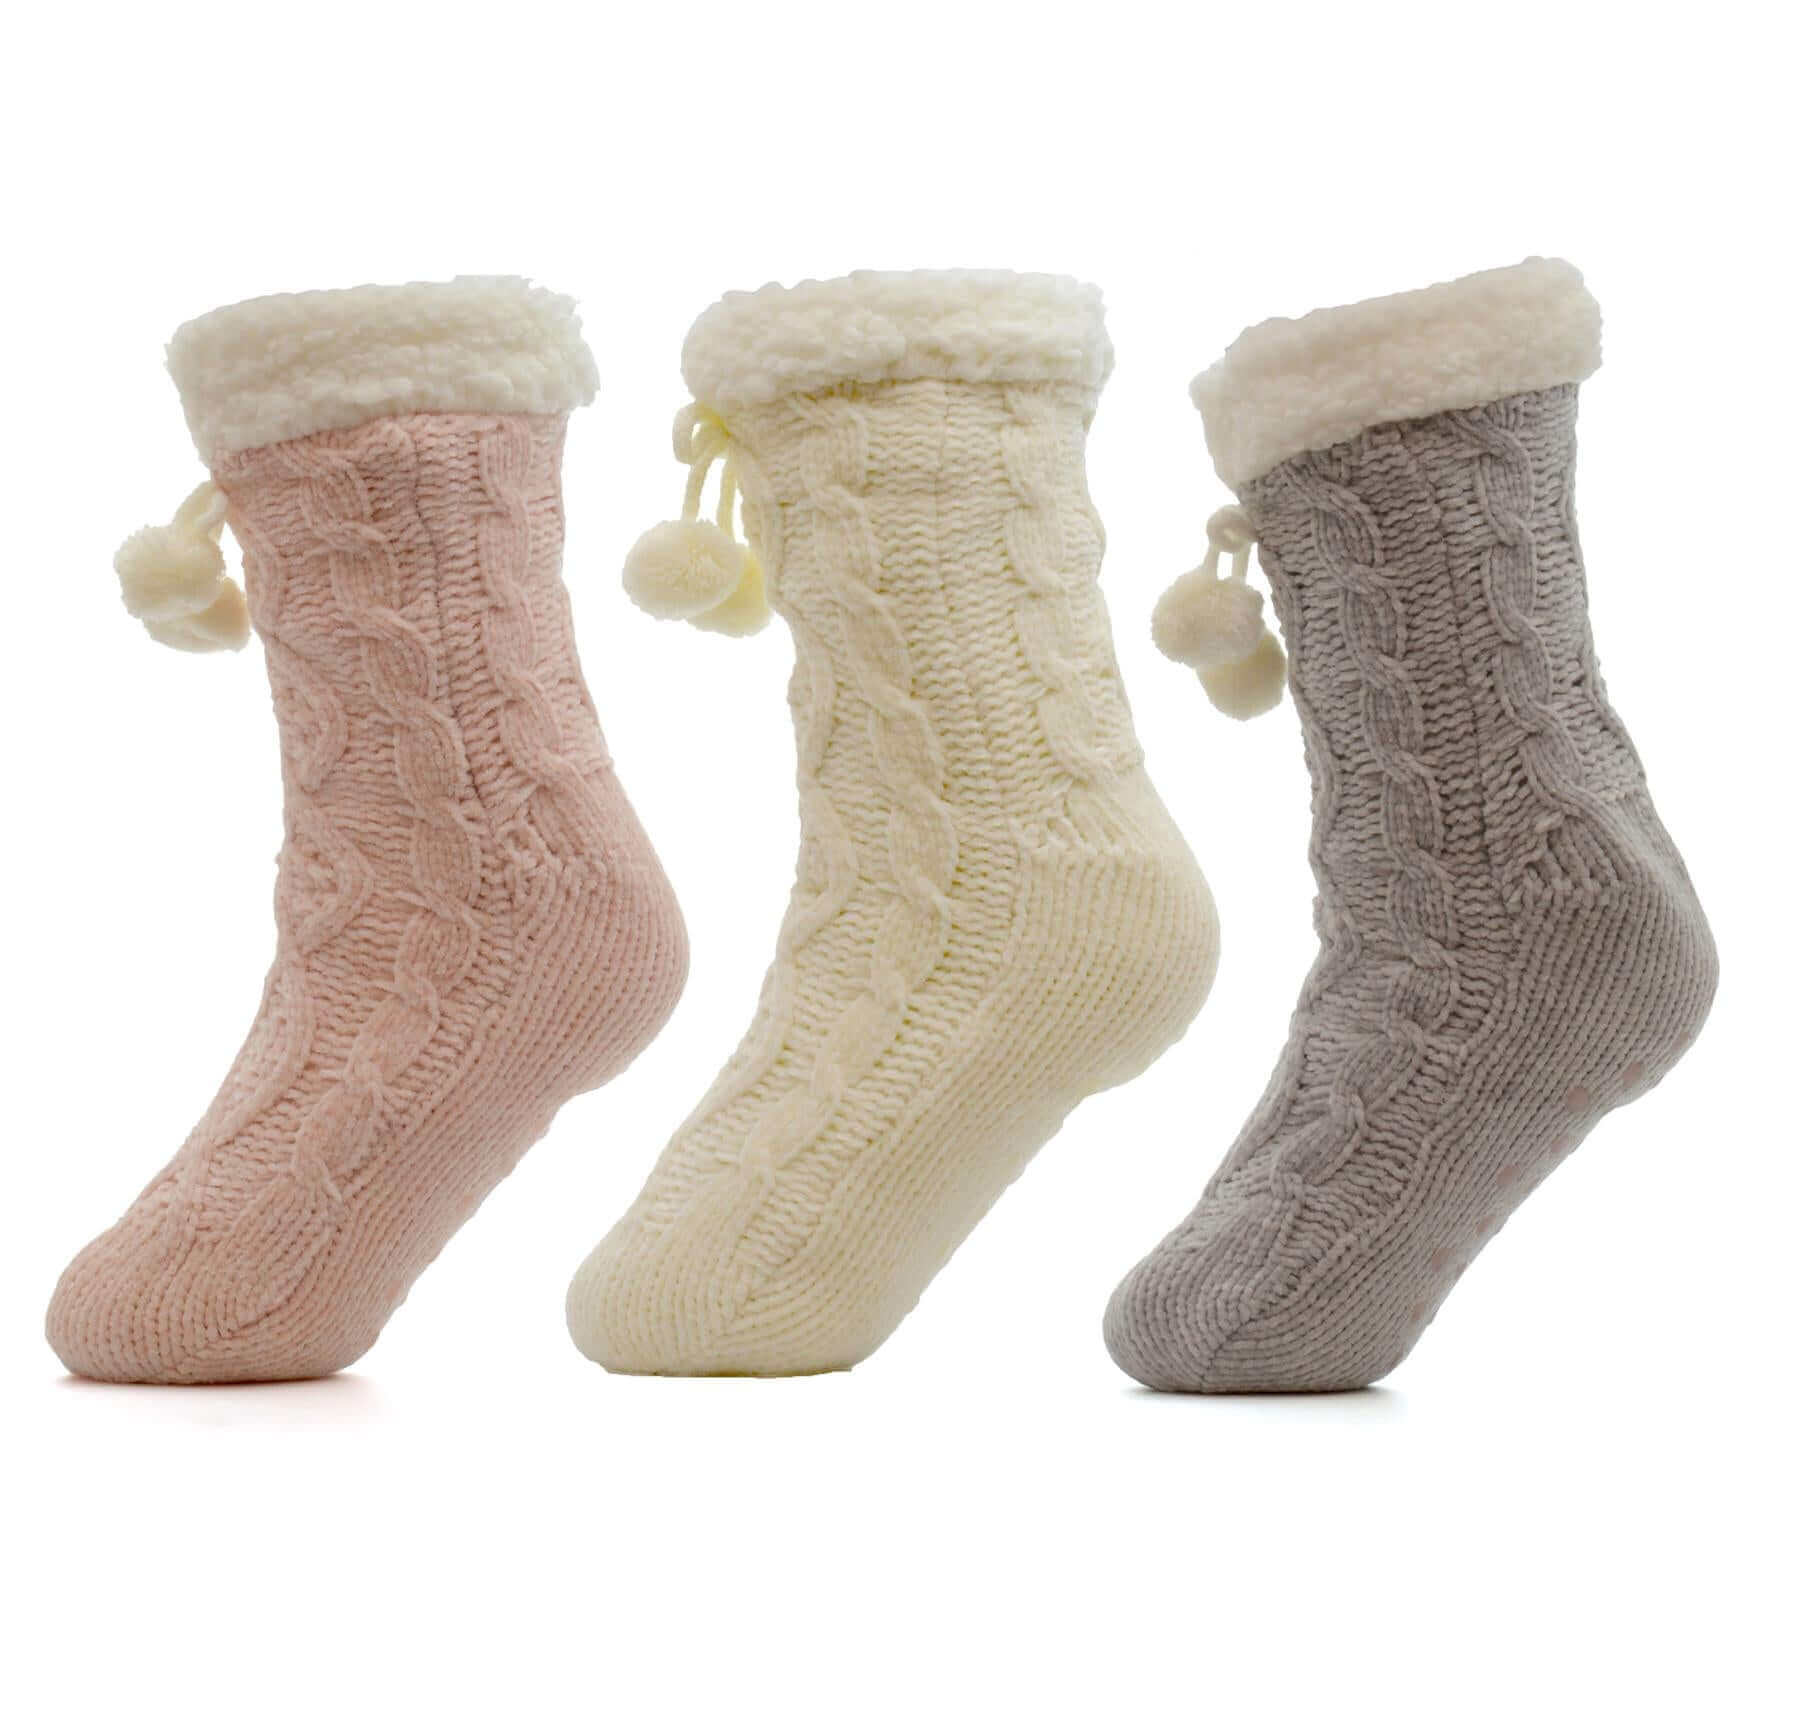 Pack Of 3 Women's Slipper Socks, Chunky Knit Stocking Fillers, Fur Lined Boot Sock. Buy now for £20.00. A Socks by Sock Stack. 4-7, acrylic, assorted, blush pink, boot, boot socks, breathable, chunky, comfortable, dusky pink, faux fur, festive, fleece, fl